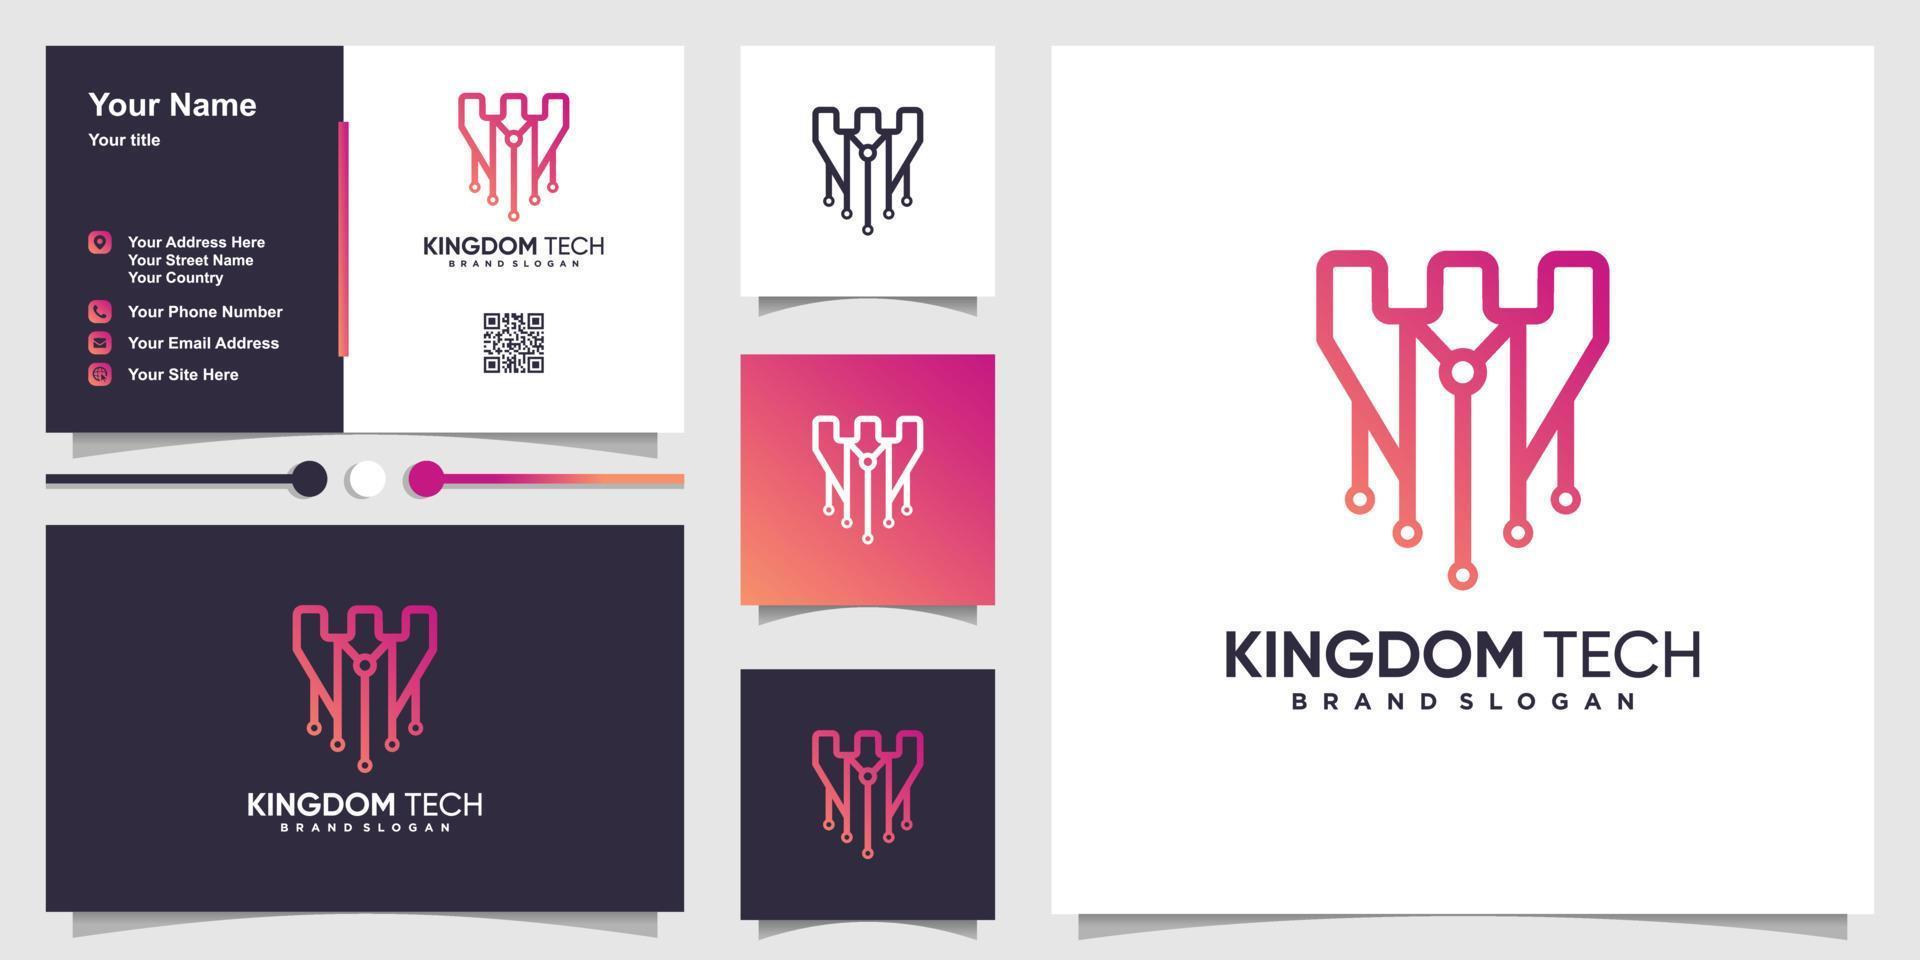 Kingdom tech logo with creative line art style and business card design Premium Vector